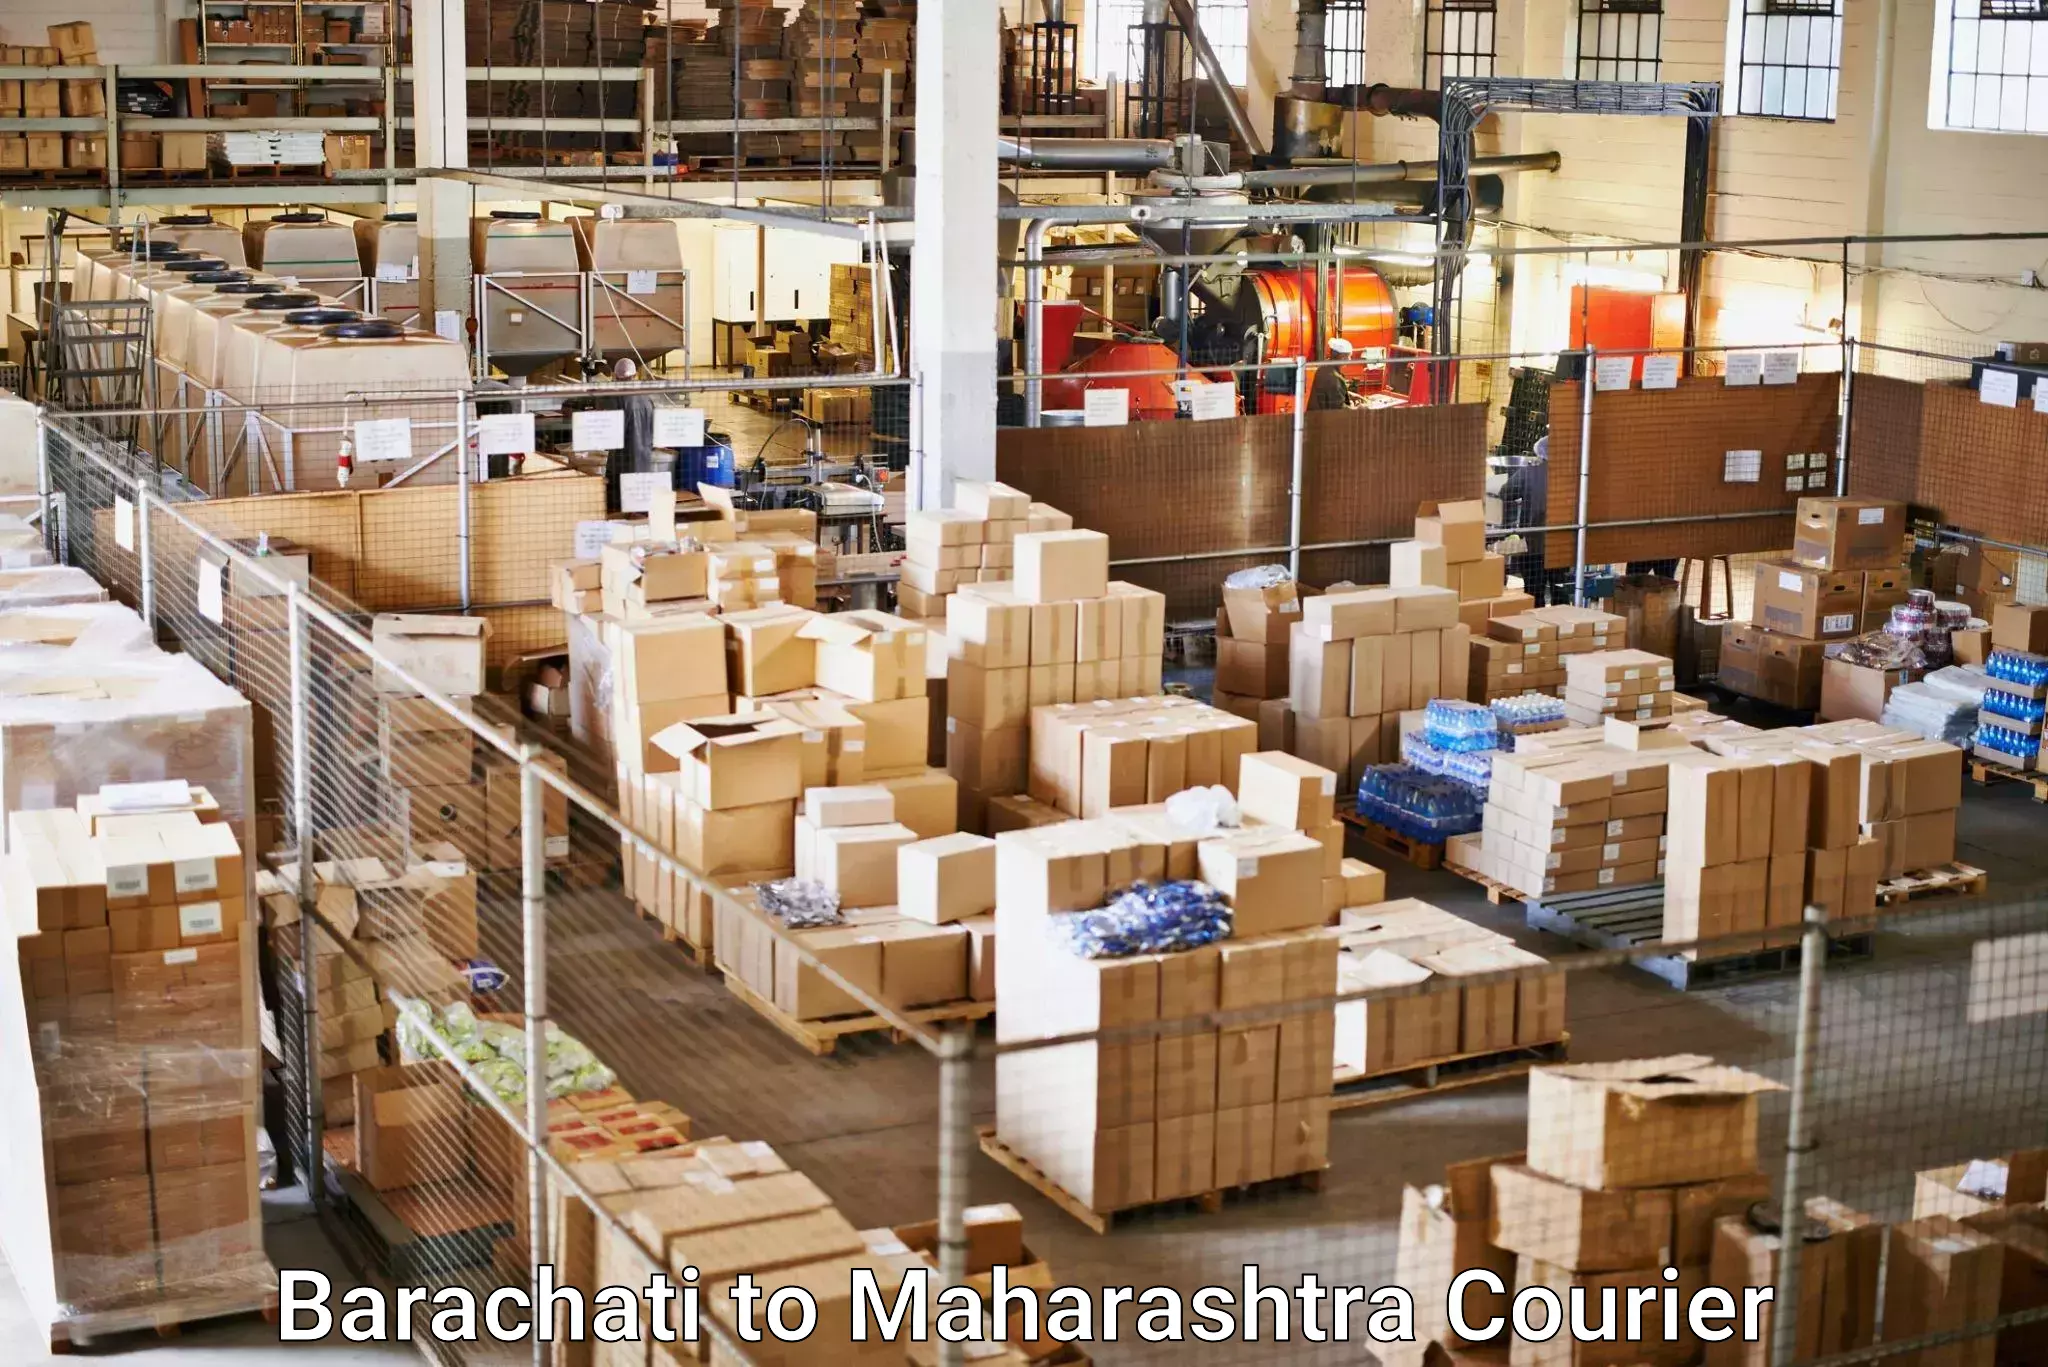 State-of-the-art courier technology Barachati to Pimpri Chinchwad